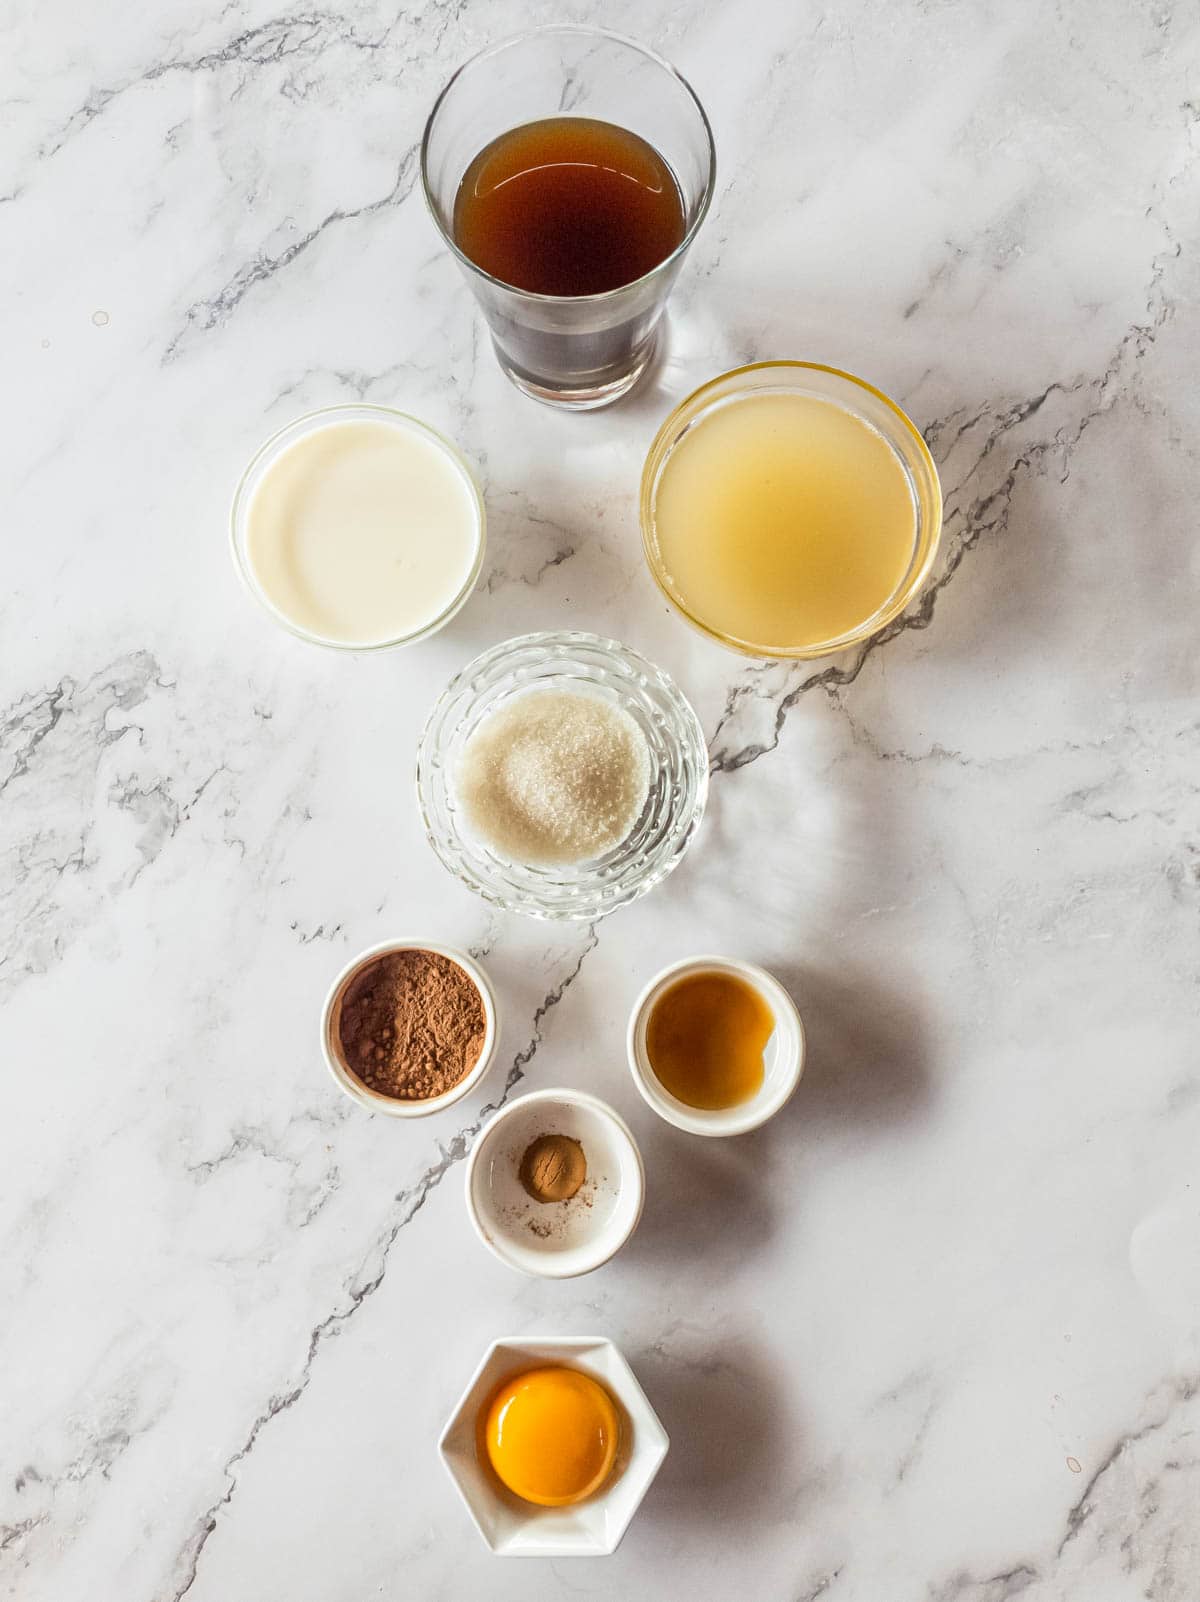 A picture of all the bone broth latte ingredients on marble background.